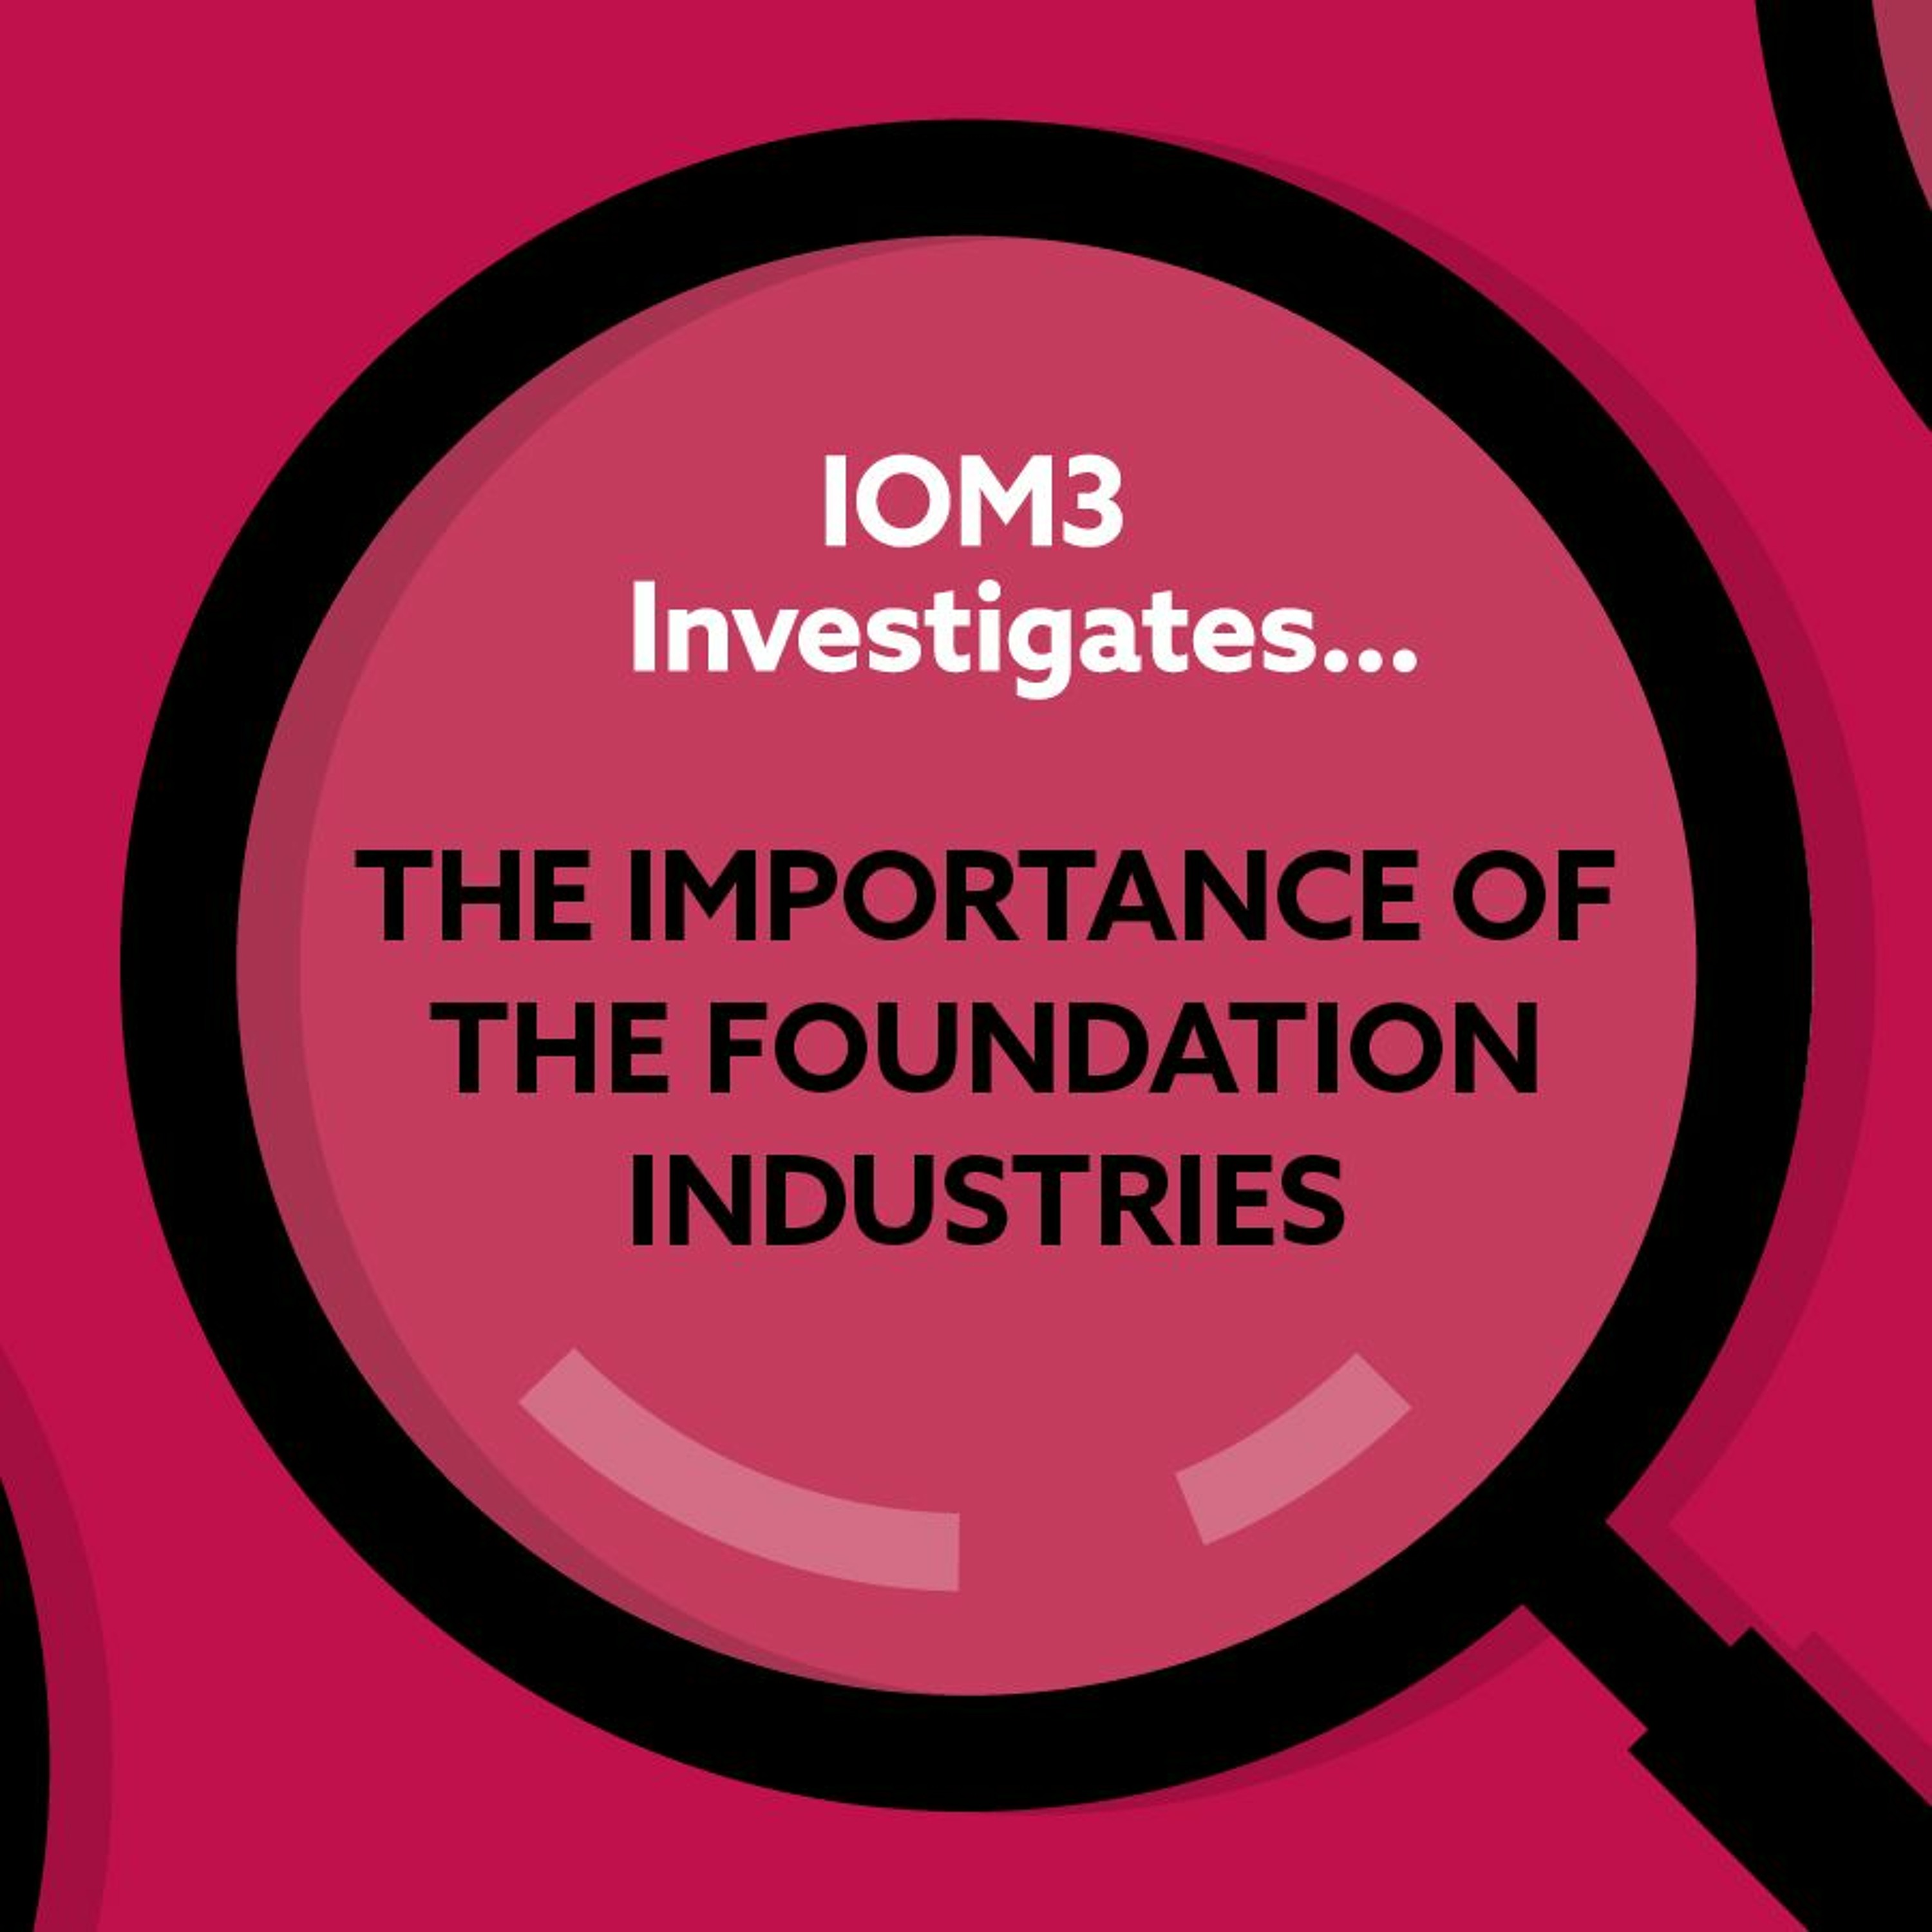 IOM3 Investigates... the importance of the foundation industries